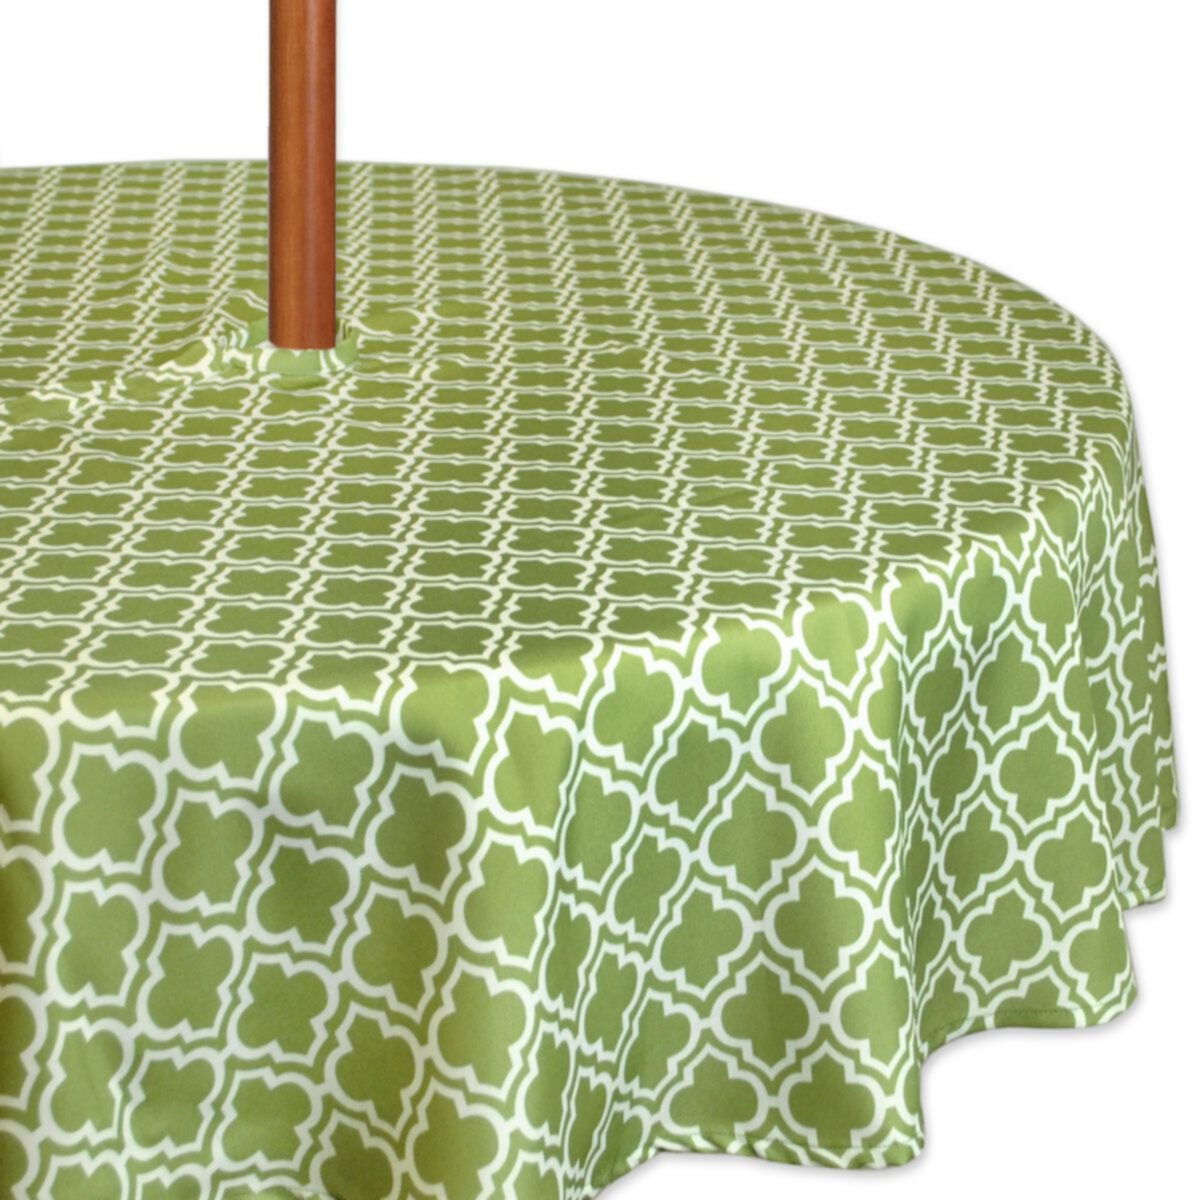 Green and White Lattice Patterned Round Tablecloth with Zipper 60” CC Home Furnishings